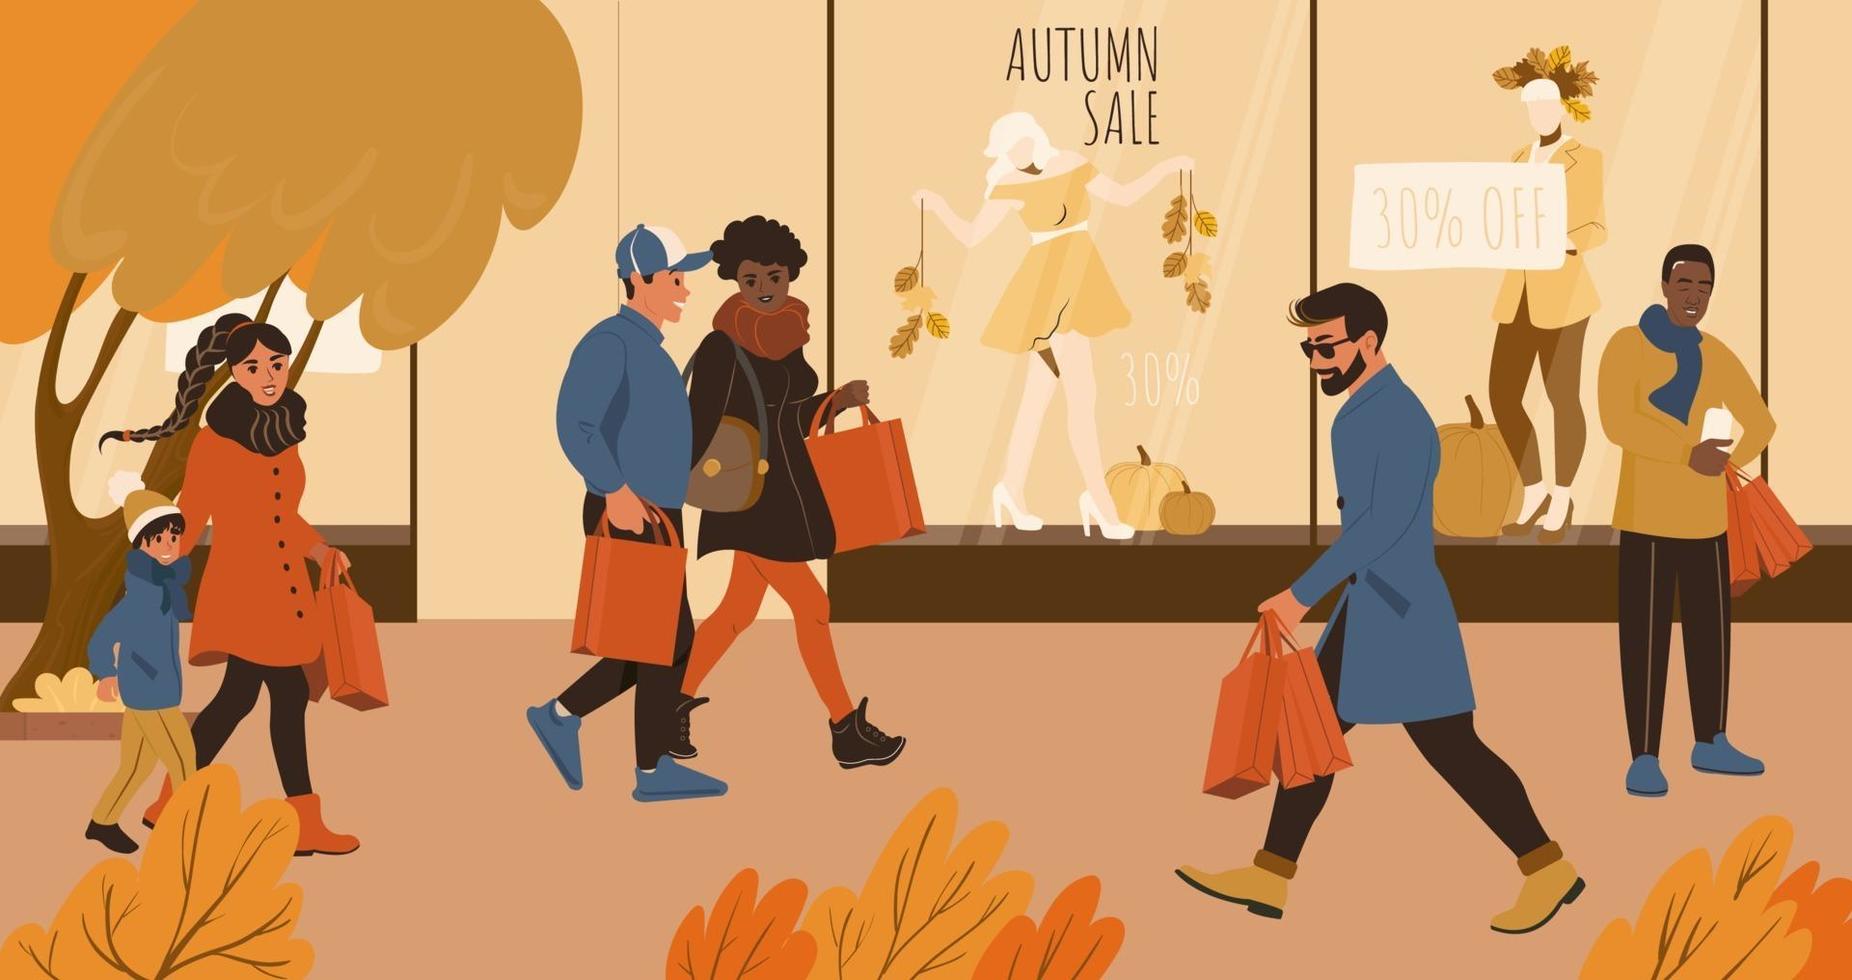 People on the autumn sale shopping walking in the city vector